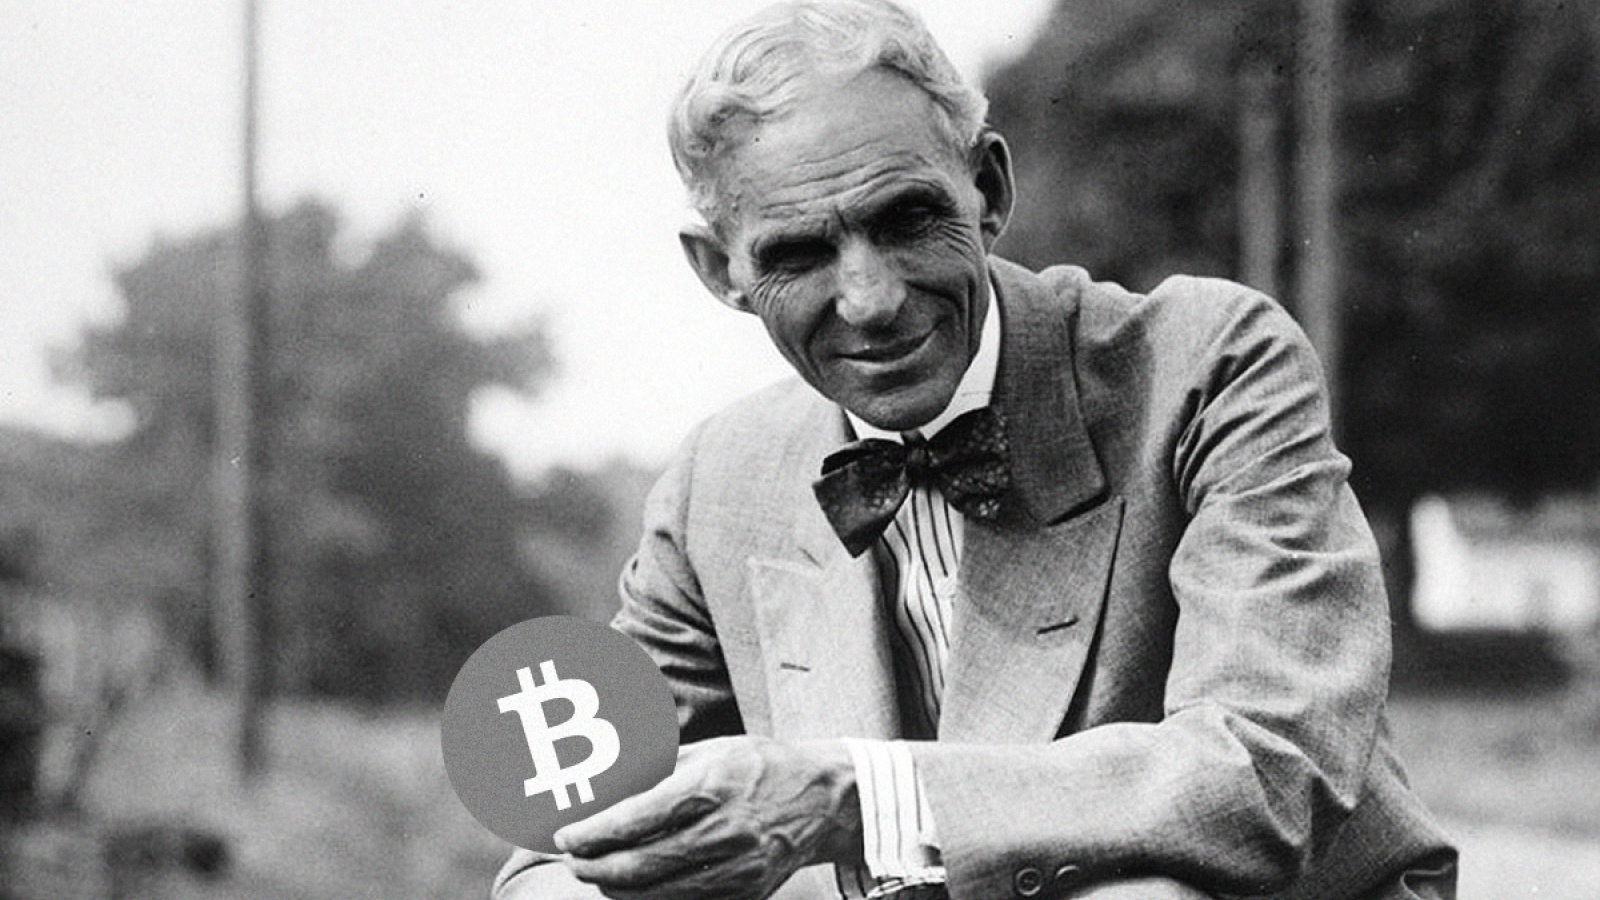 Bitcoin (BTC) Predicted by Henry Ford 100 Years Ago